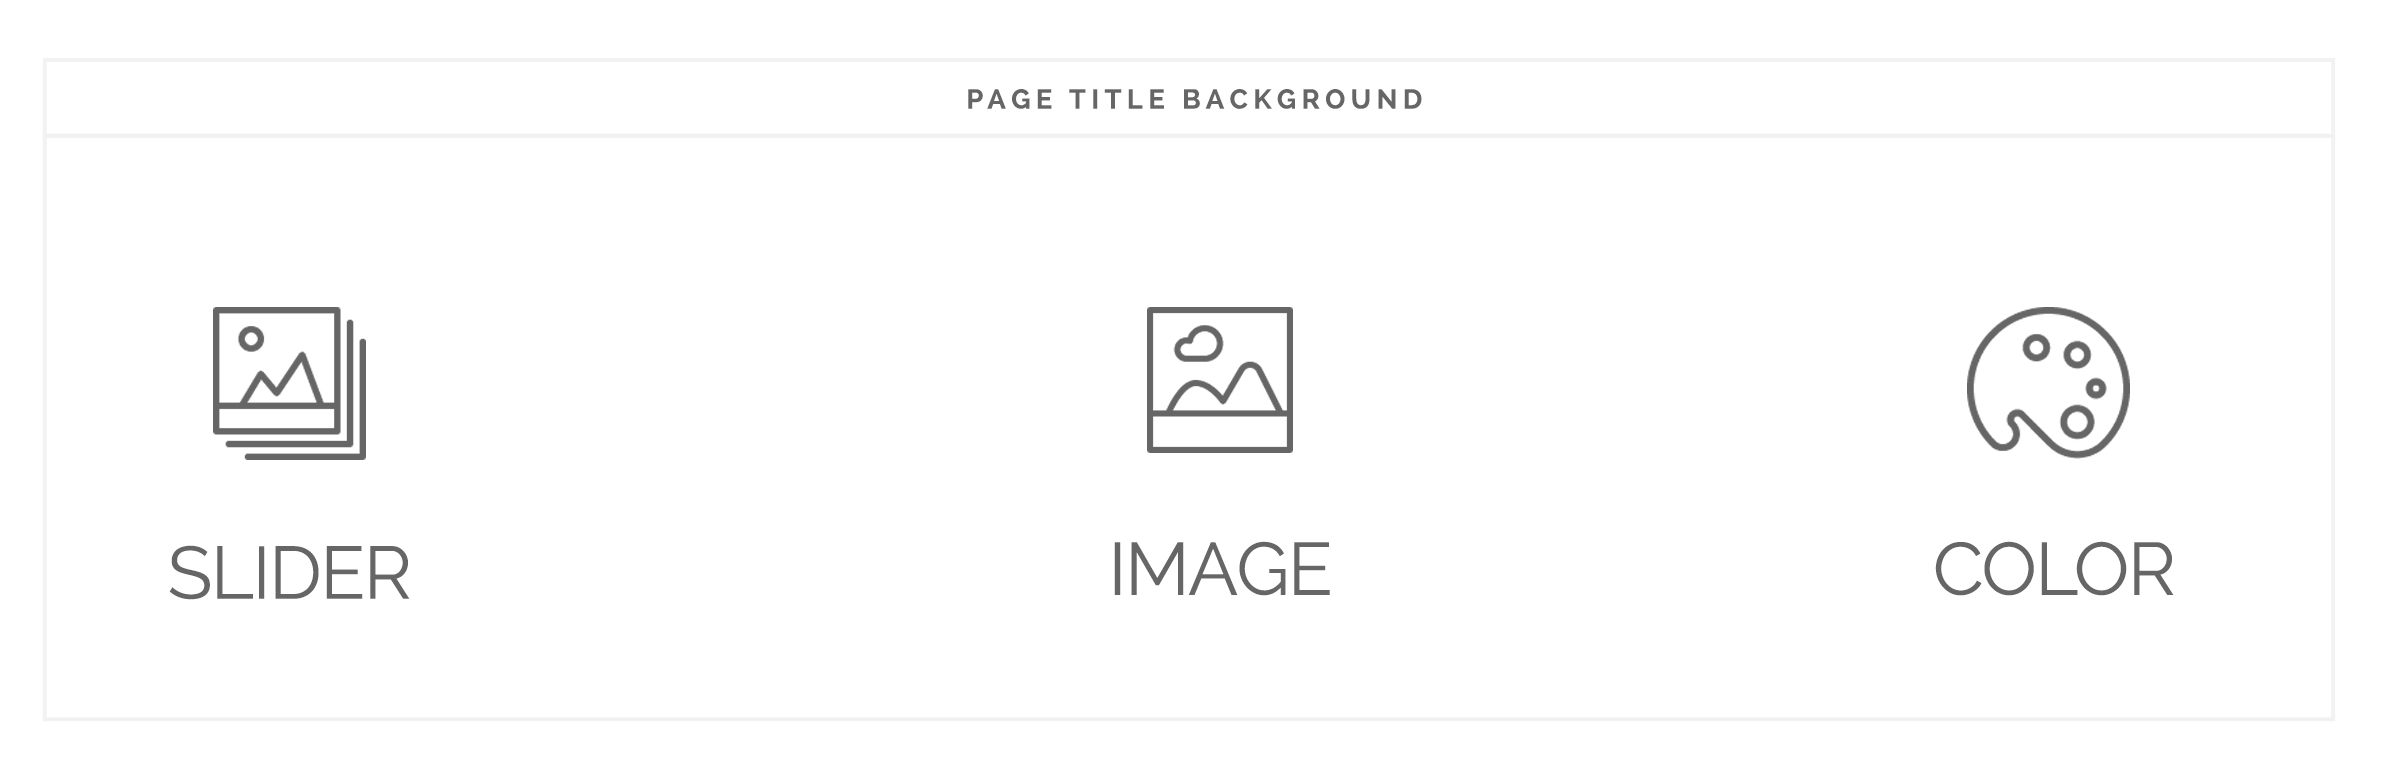 Page Title Background